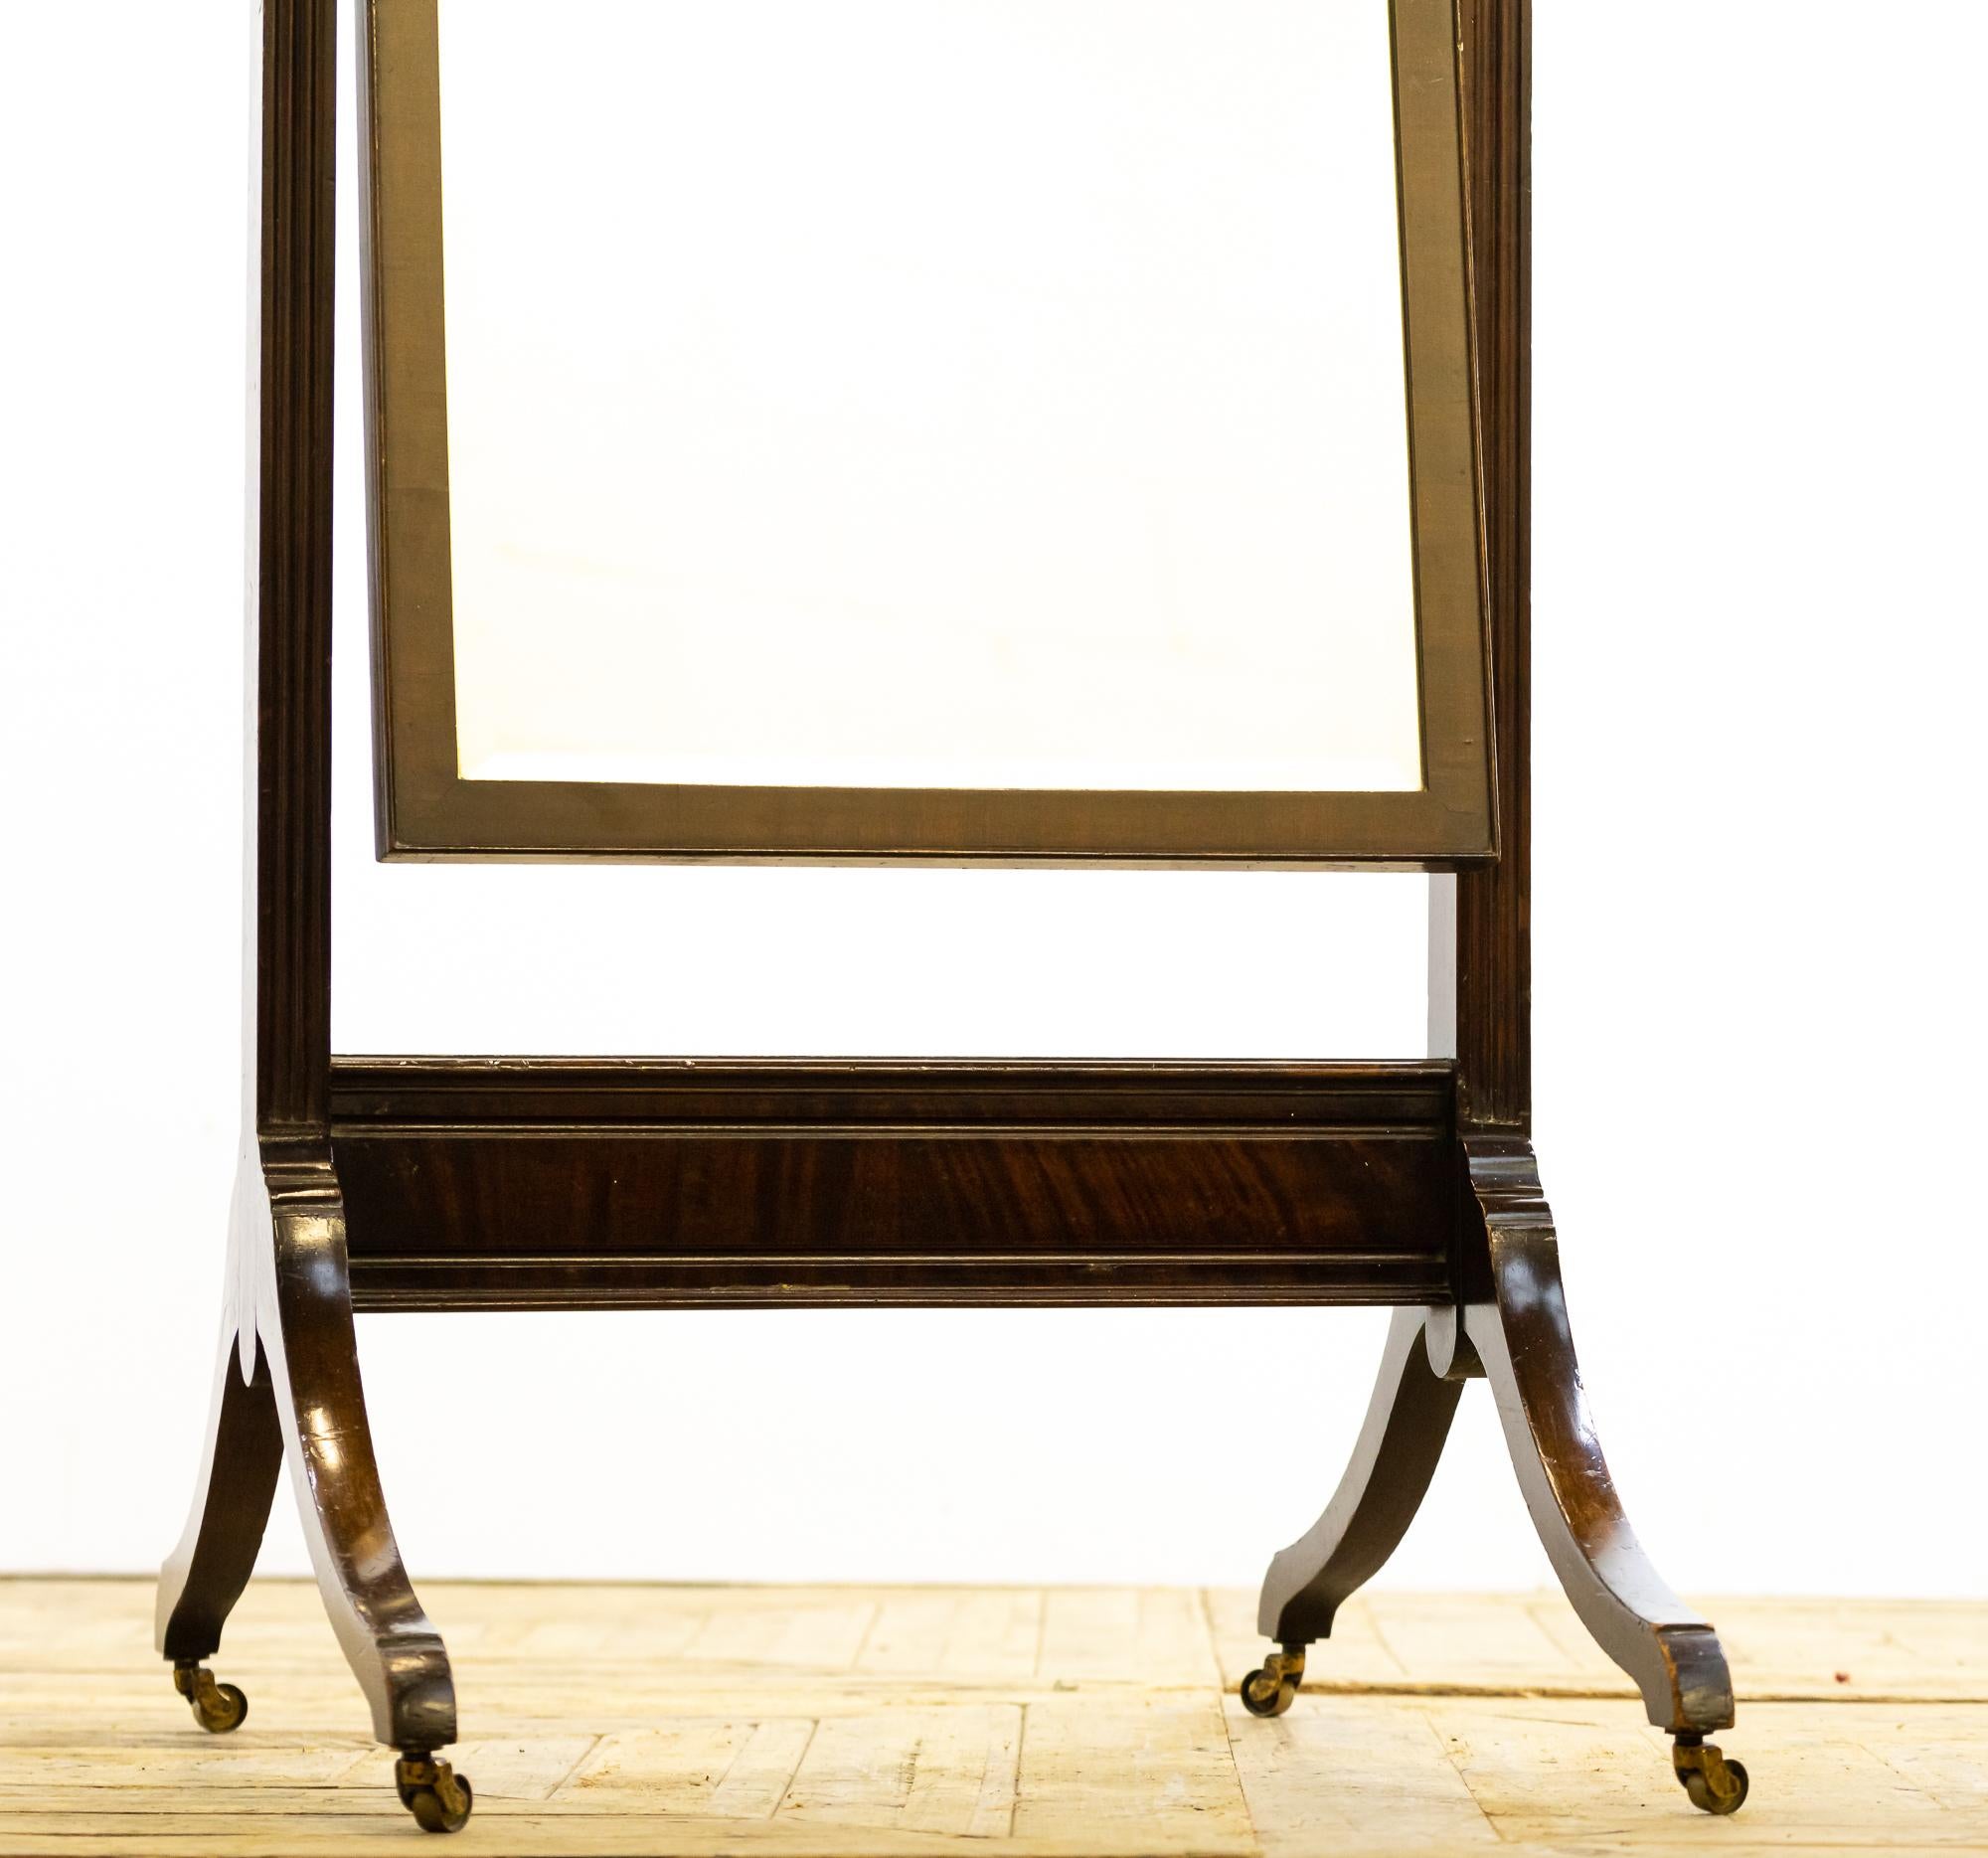 A lovely 19th century cheval mirror of small proportions.